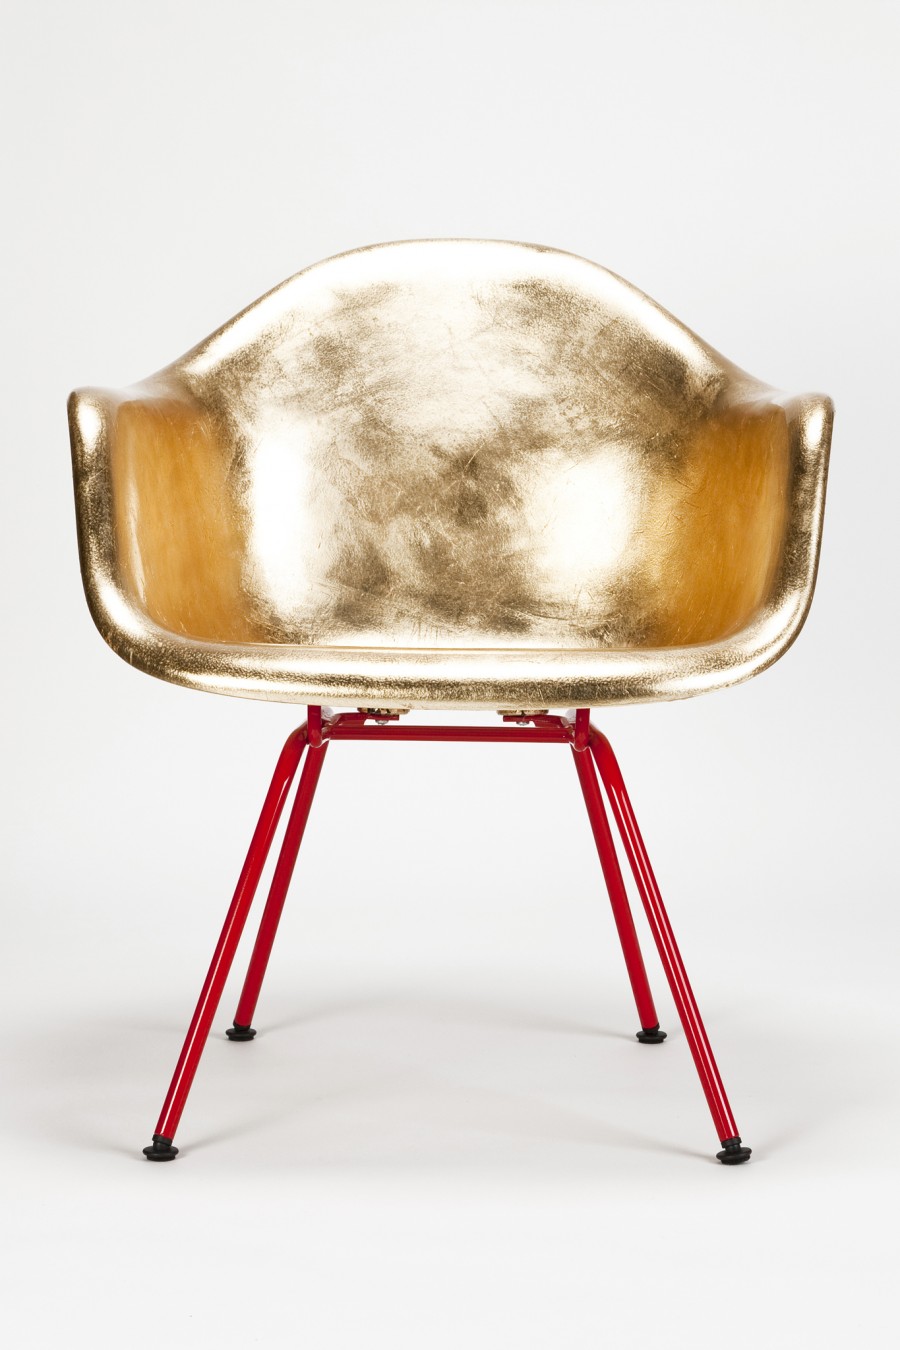 Eames and Jacobsen Go Goldy Gold by Reha Okay - on flodeau.com 012